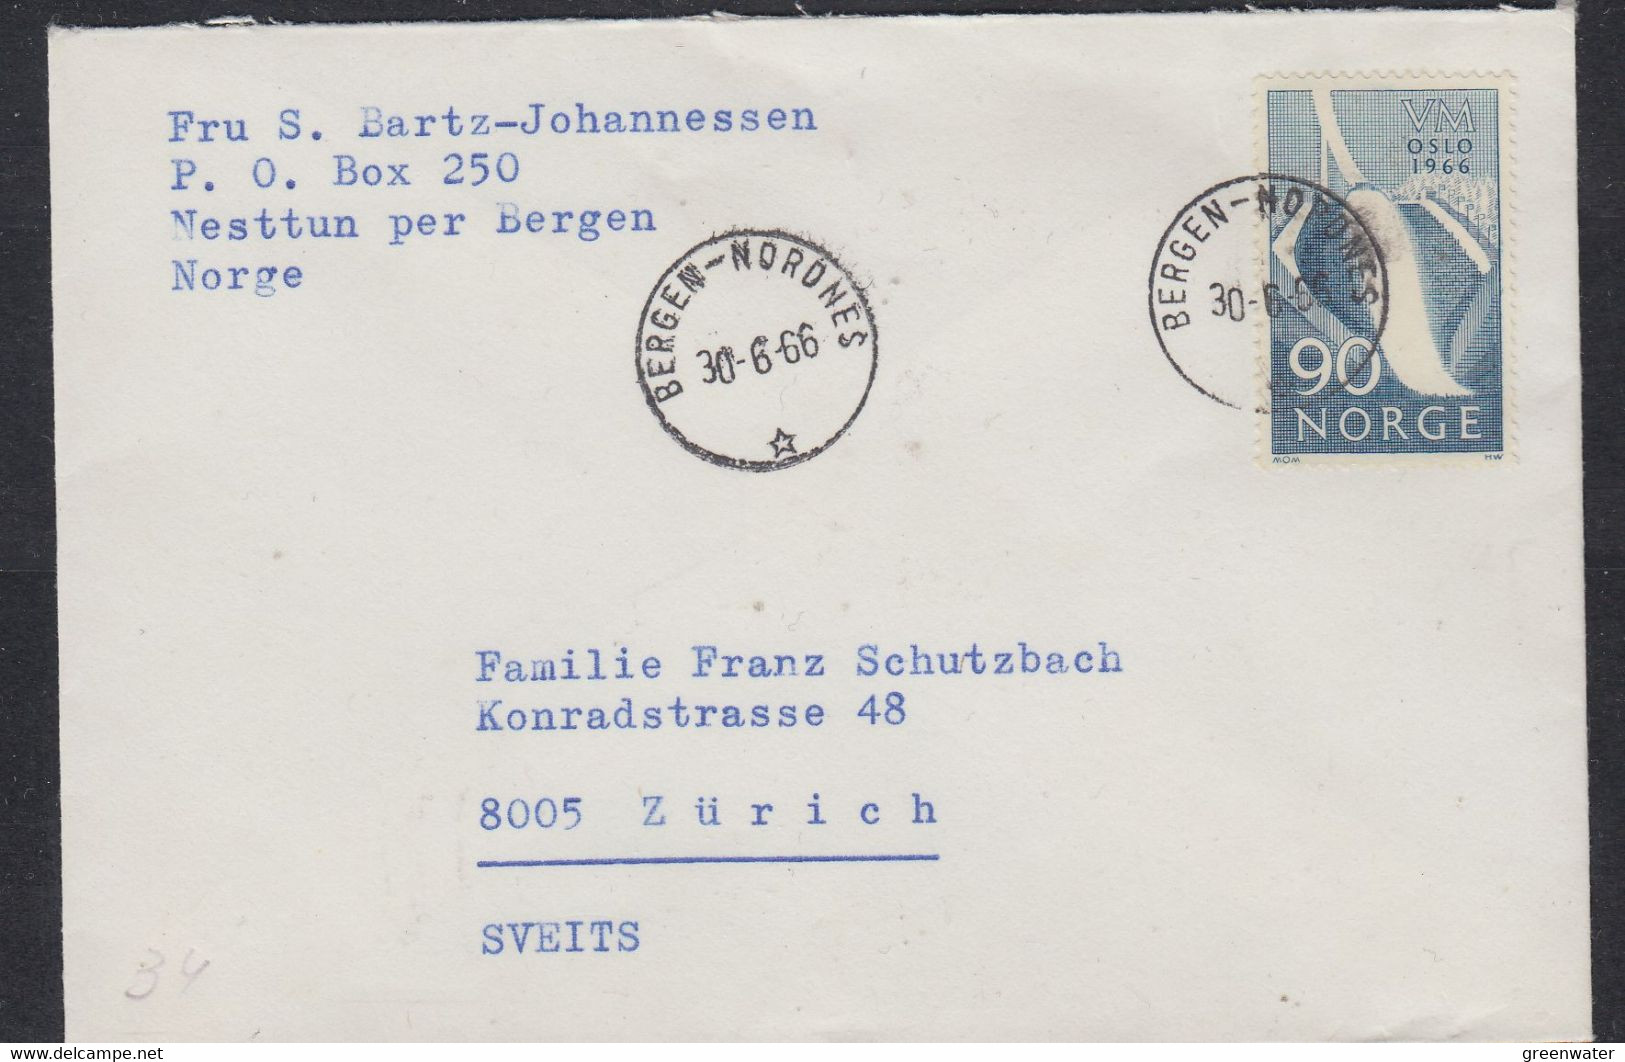 Norway 1966 Cover Ca Bergen-Nordnes 30.6.1966 (57749) - Covers & Documents